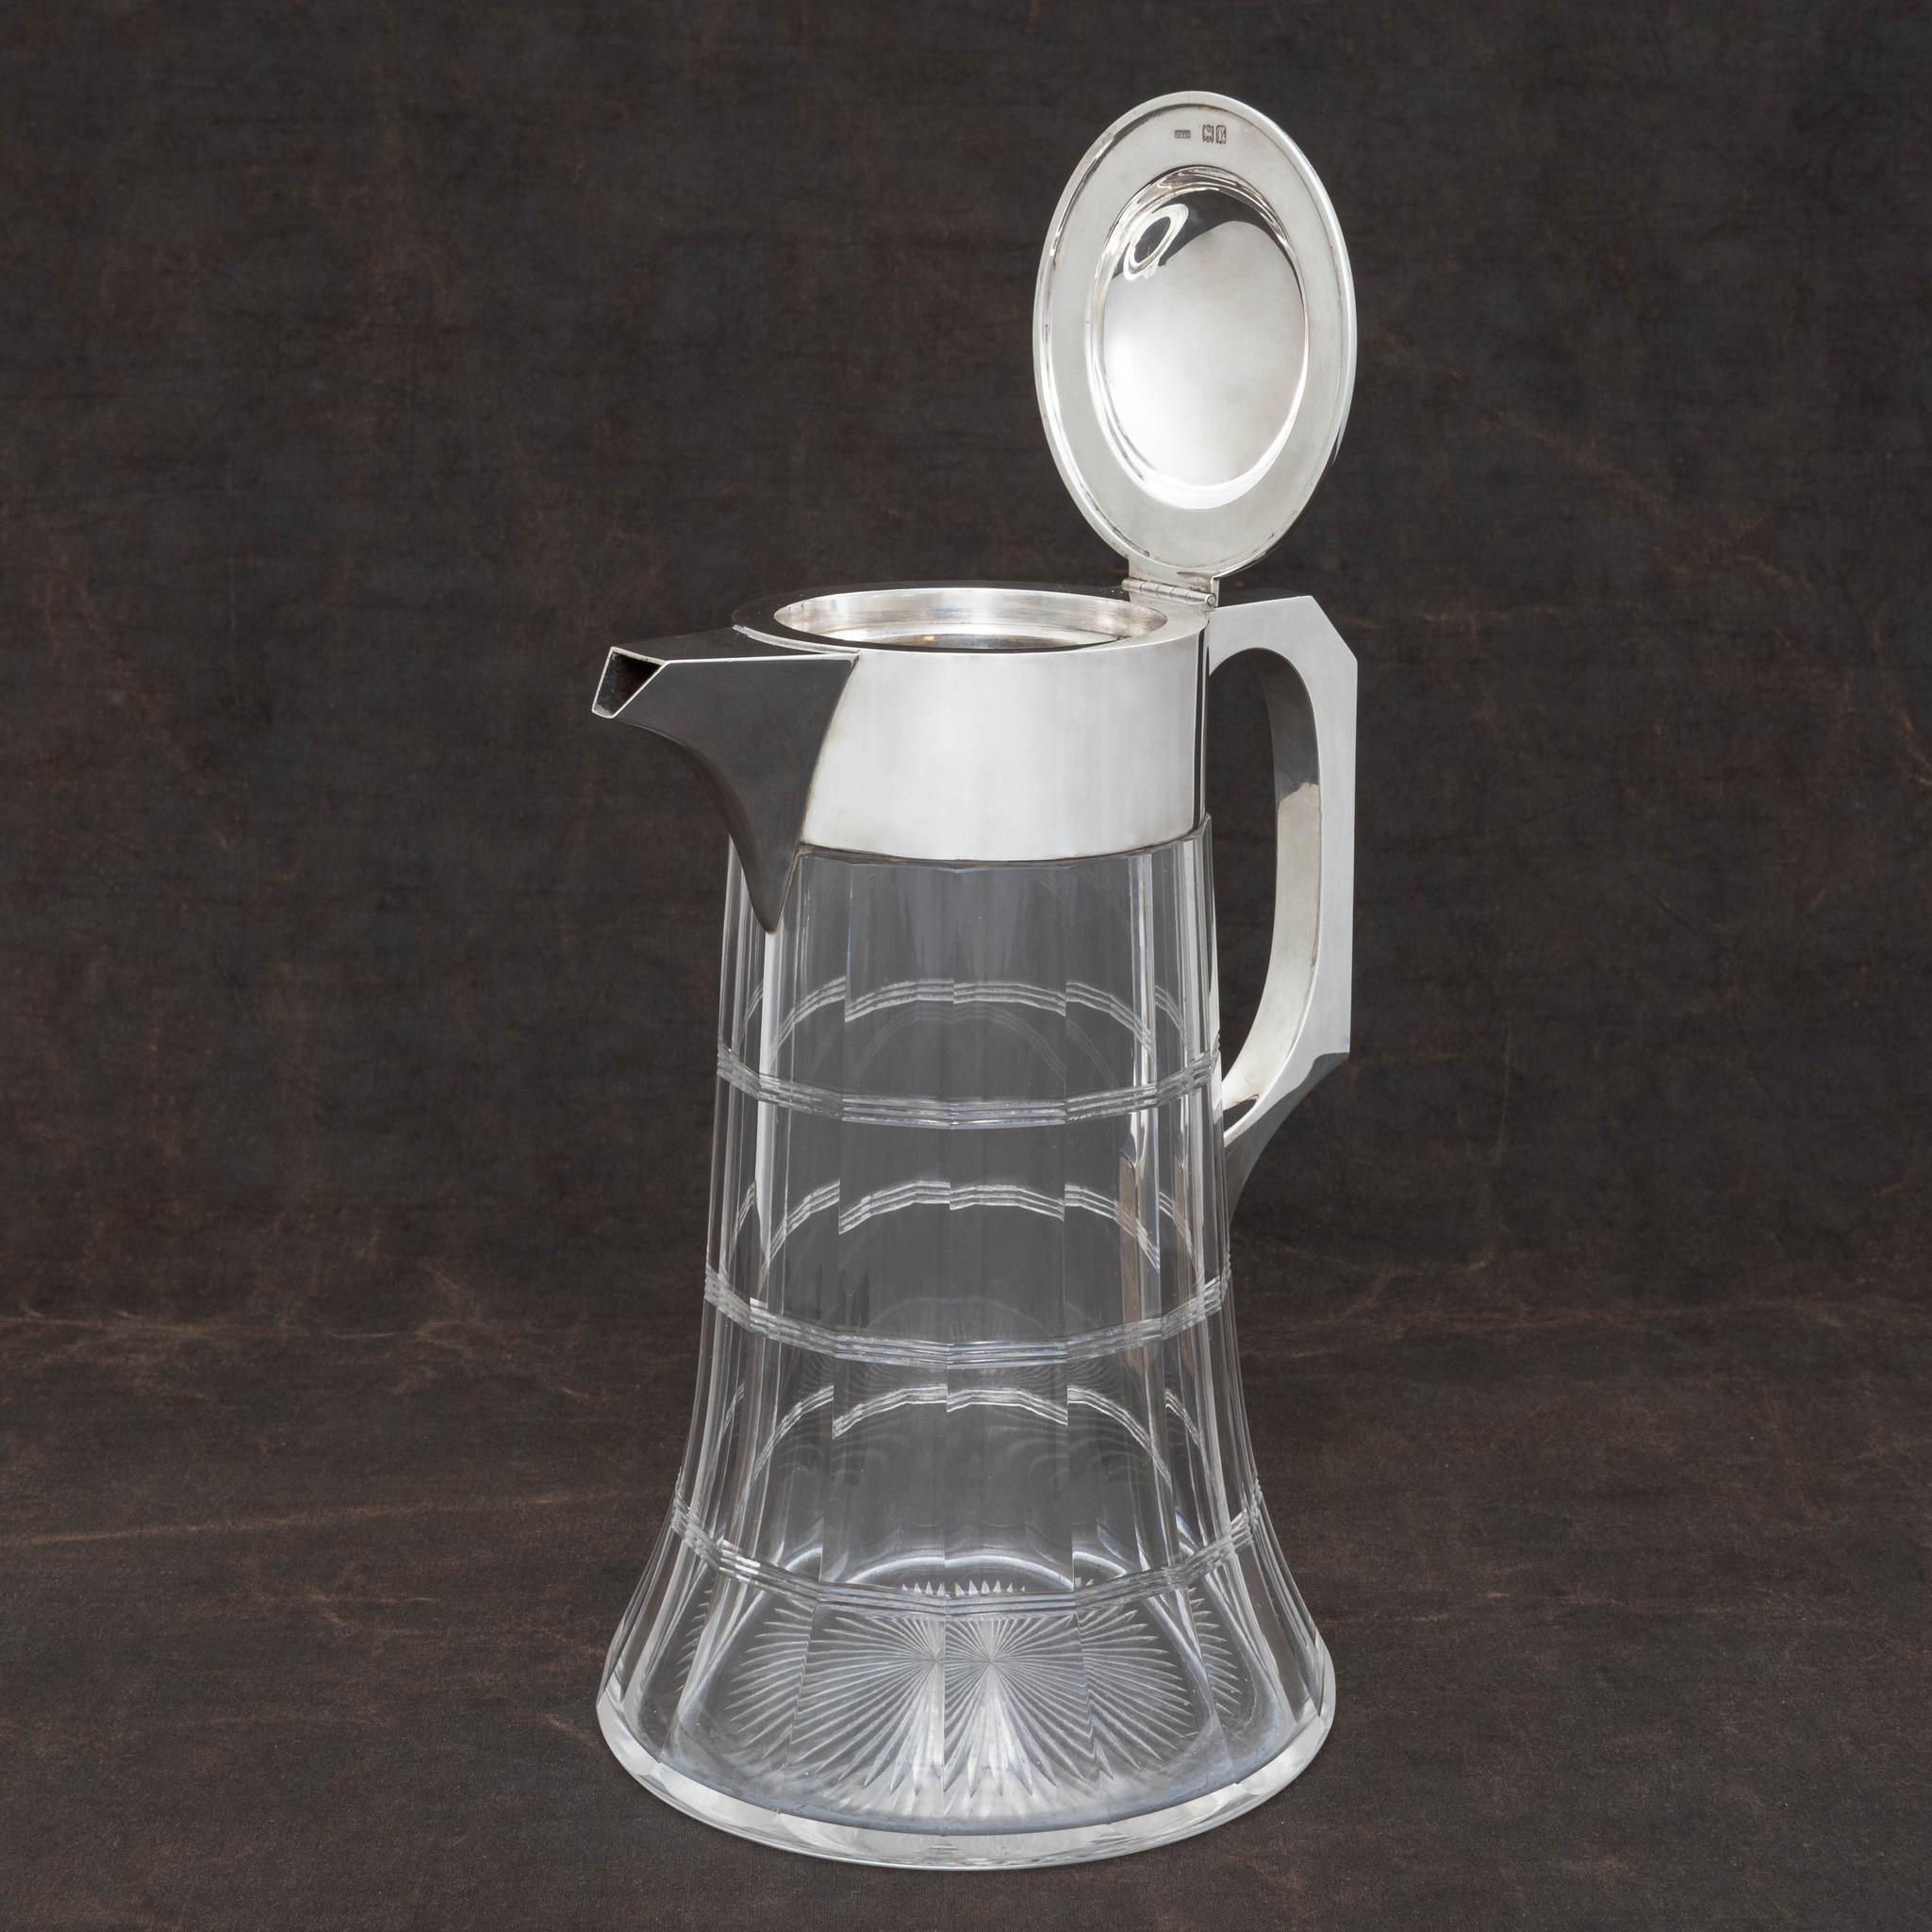 Substantial silver mounted jug with decoration cut in to the glass body and star cut to the base. Made by silversmiths John Grinsell and Sons and hallmarked Birmingham 1901.

Dimensions: 29 cm/11? inches (max. height) x 16.75 cm/6? inches (base